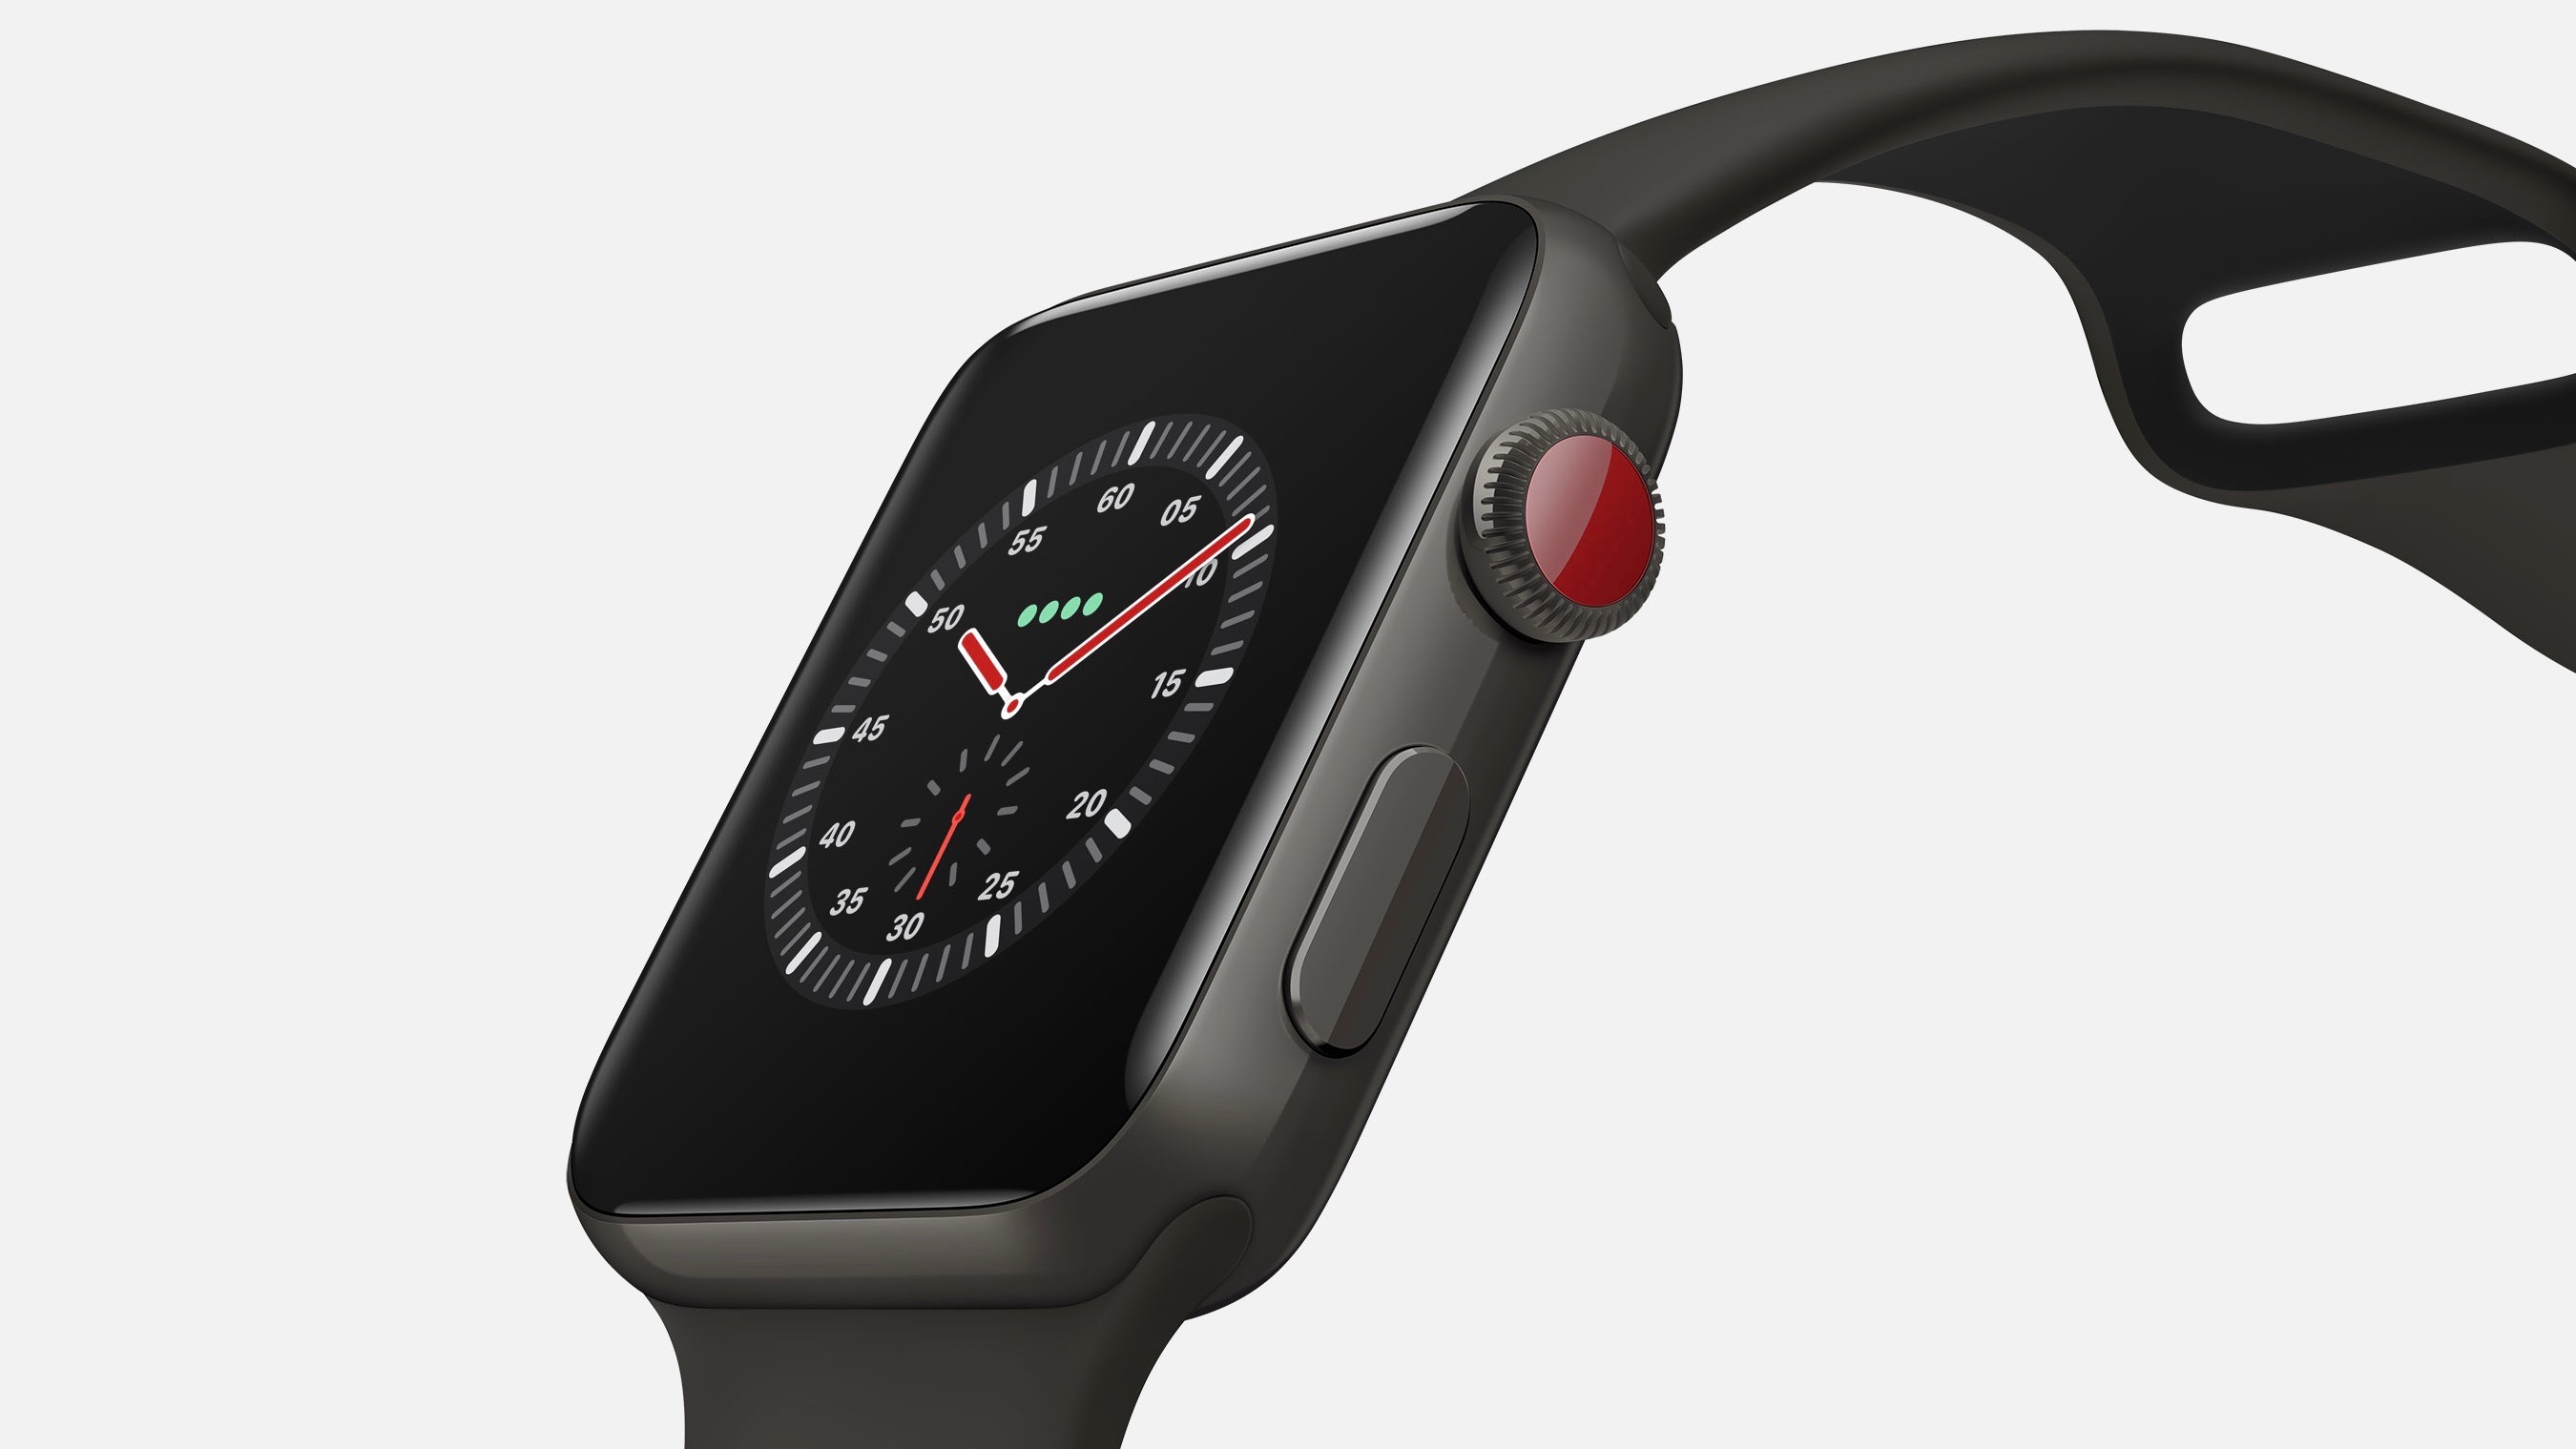 abuela Soltero Orgullo watchOS 5 Wish List: Apple Watch Podcasts, open Siri face, rethought  Control Center, more - 9to5Mac